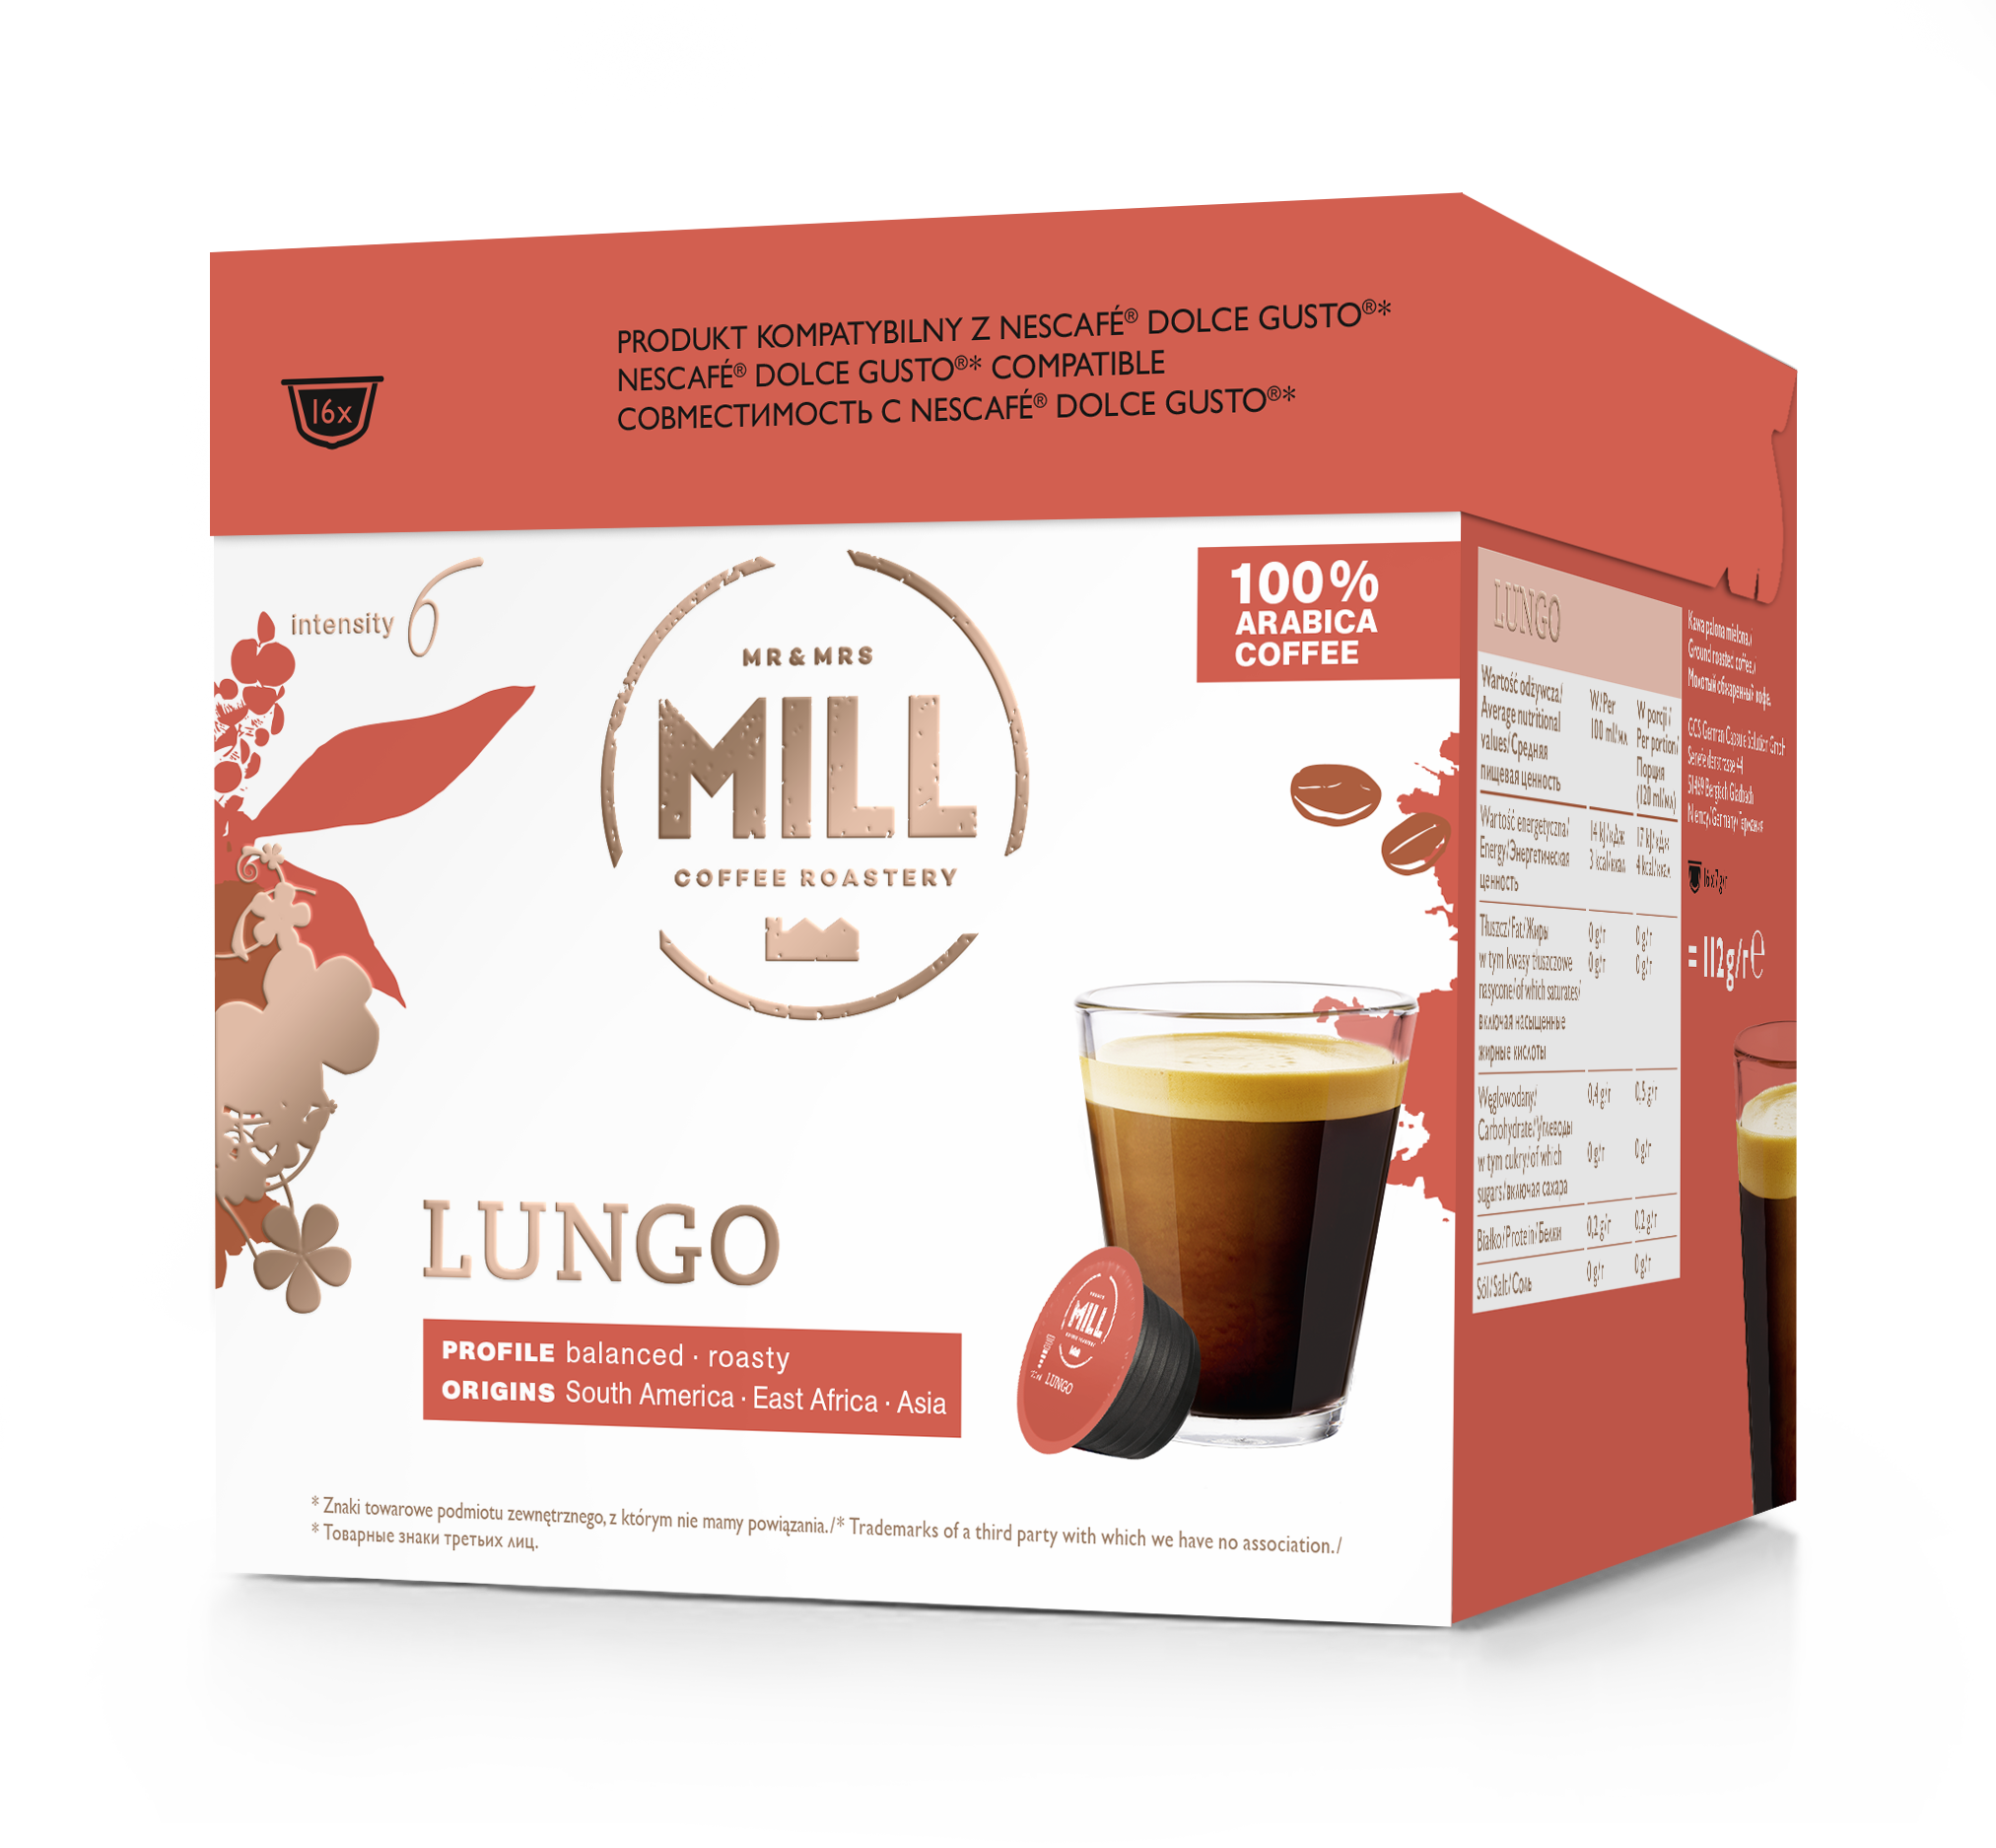 Mr&Mrs Mill Lungo capsules compatible with Dolce Gusto